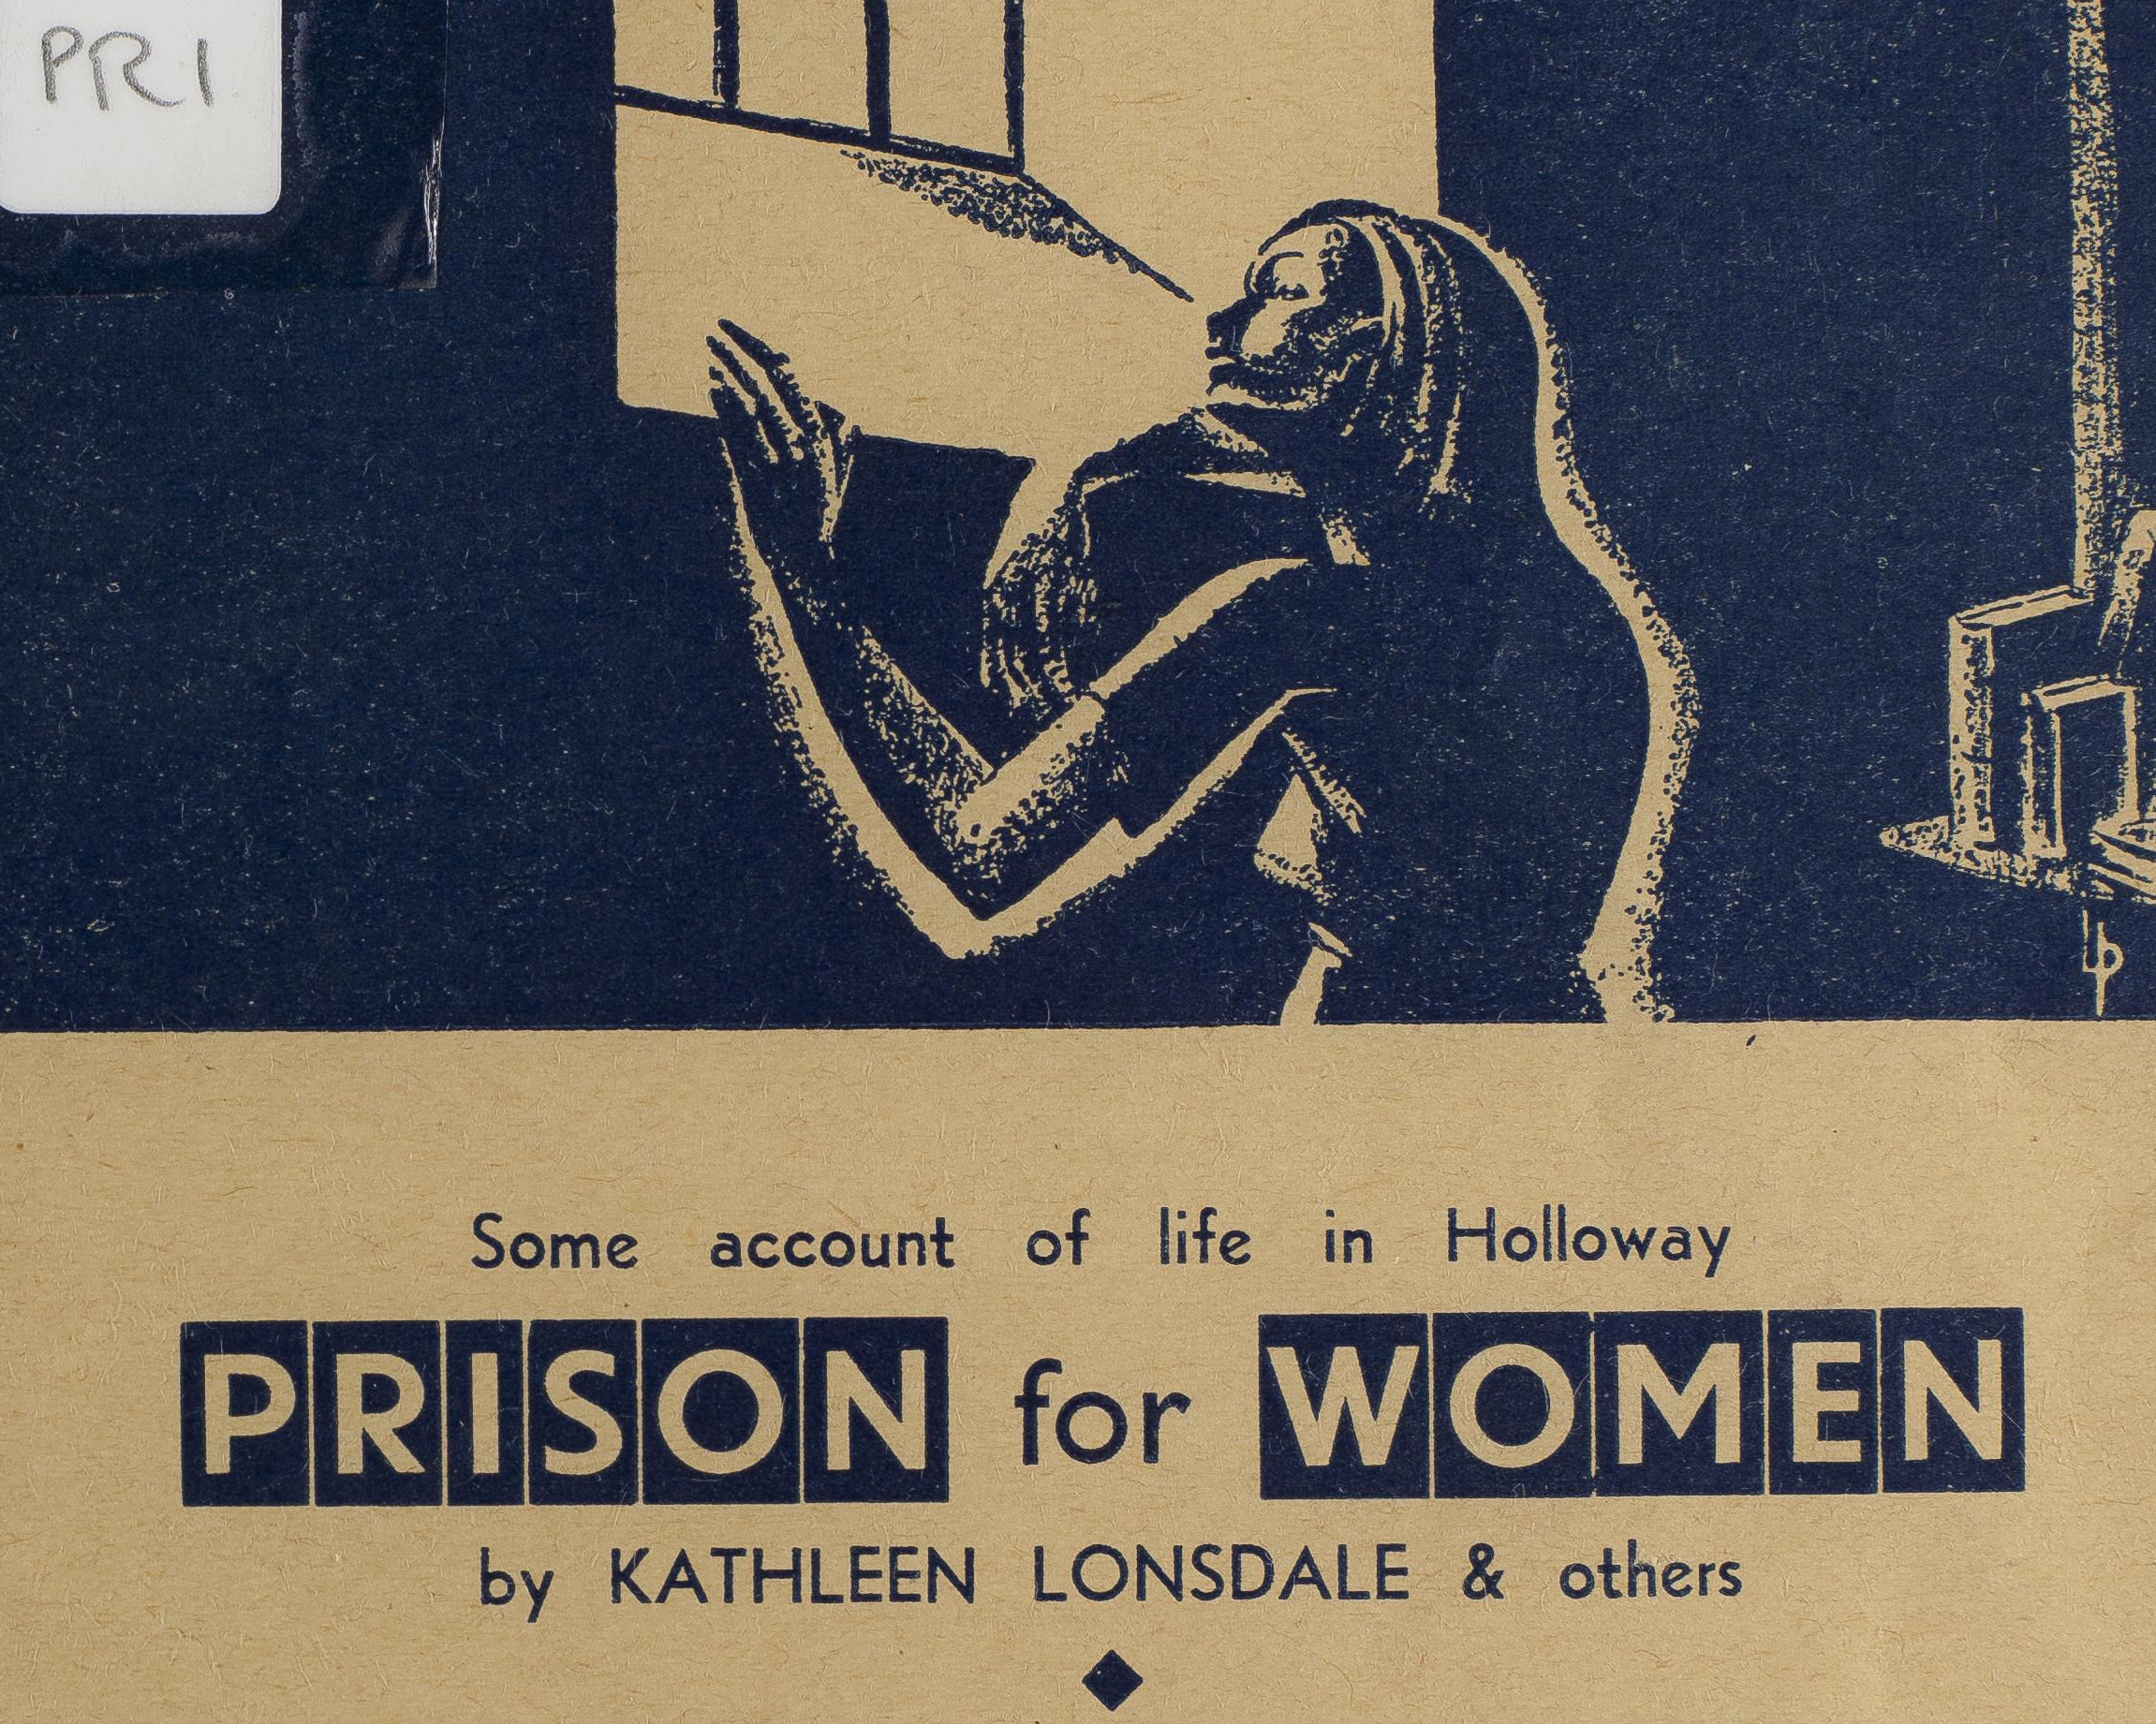 A pamphlet written by Kathleen Lonsdale called "Prison for Women"